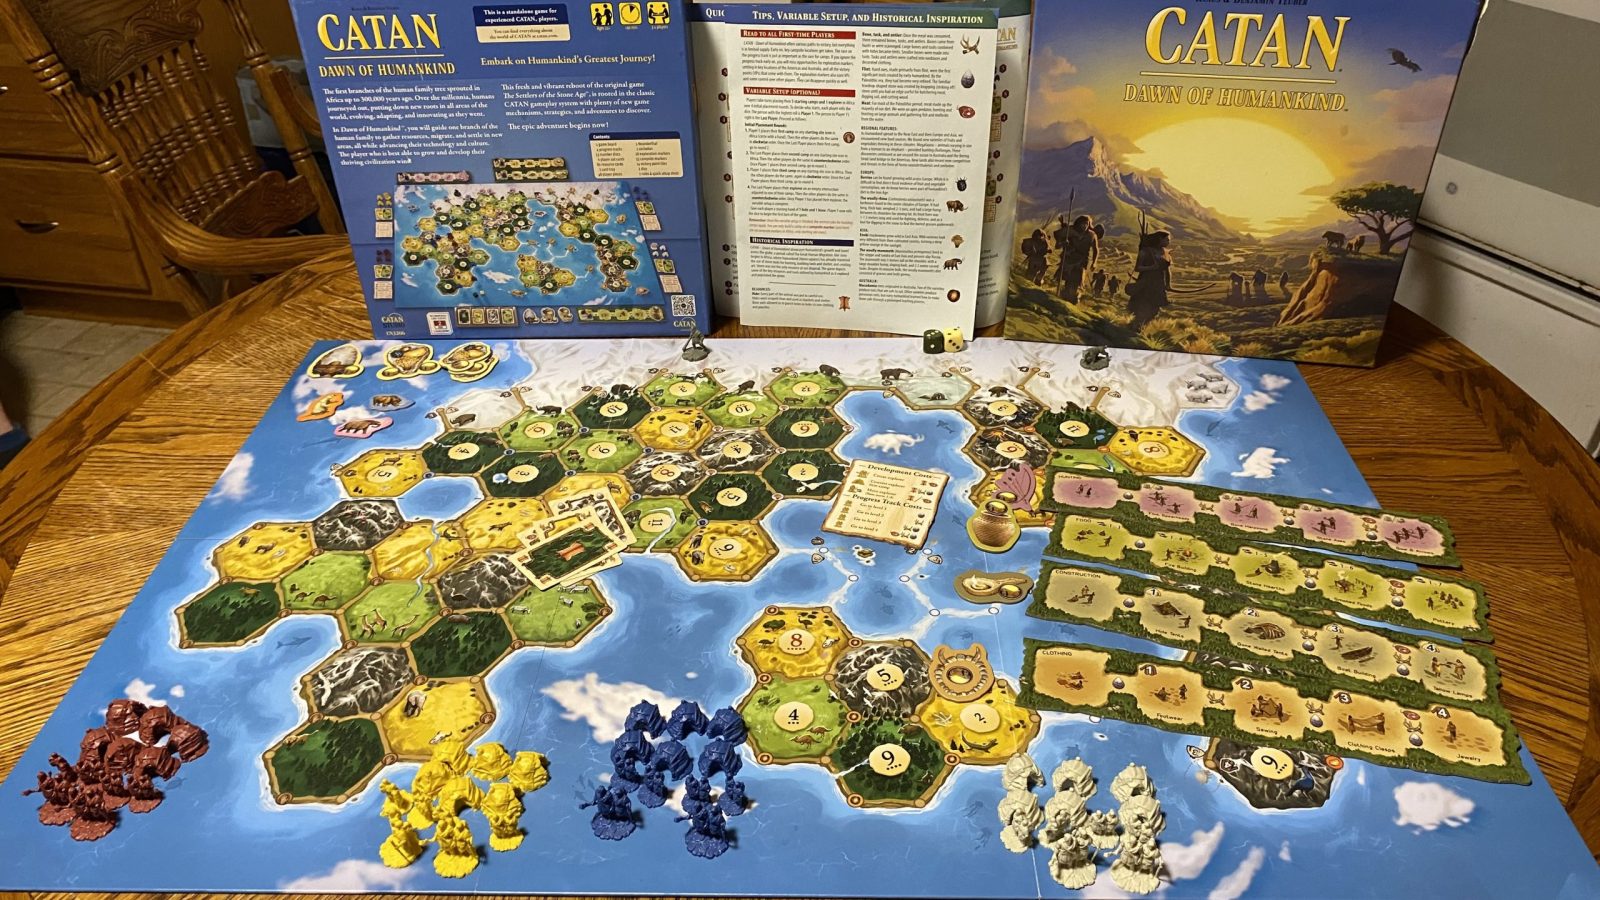 methaan Op de grond potlood Catan: Dawn of Humankind Review - Exploring For Victory - GAMING TREND